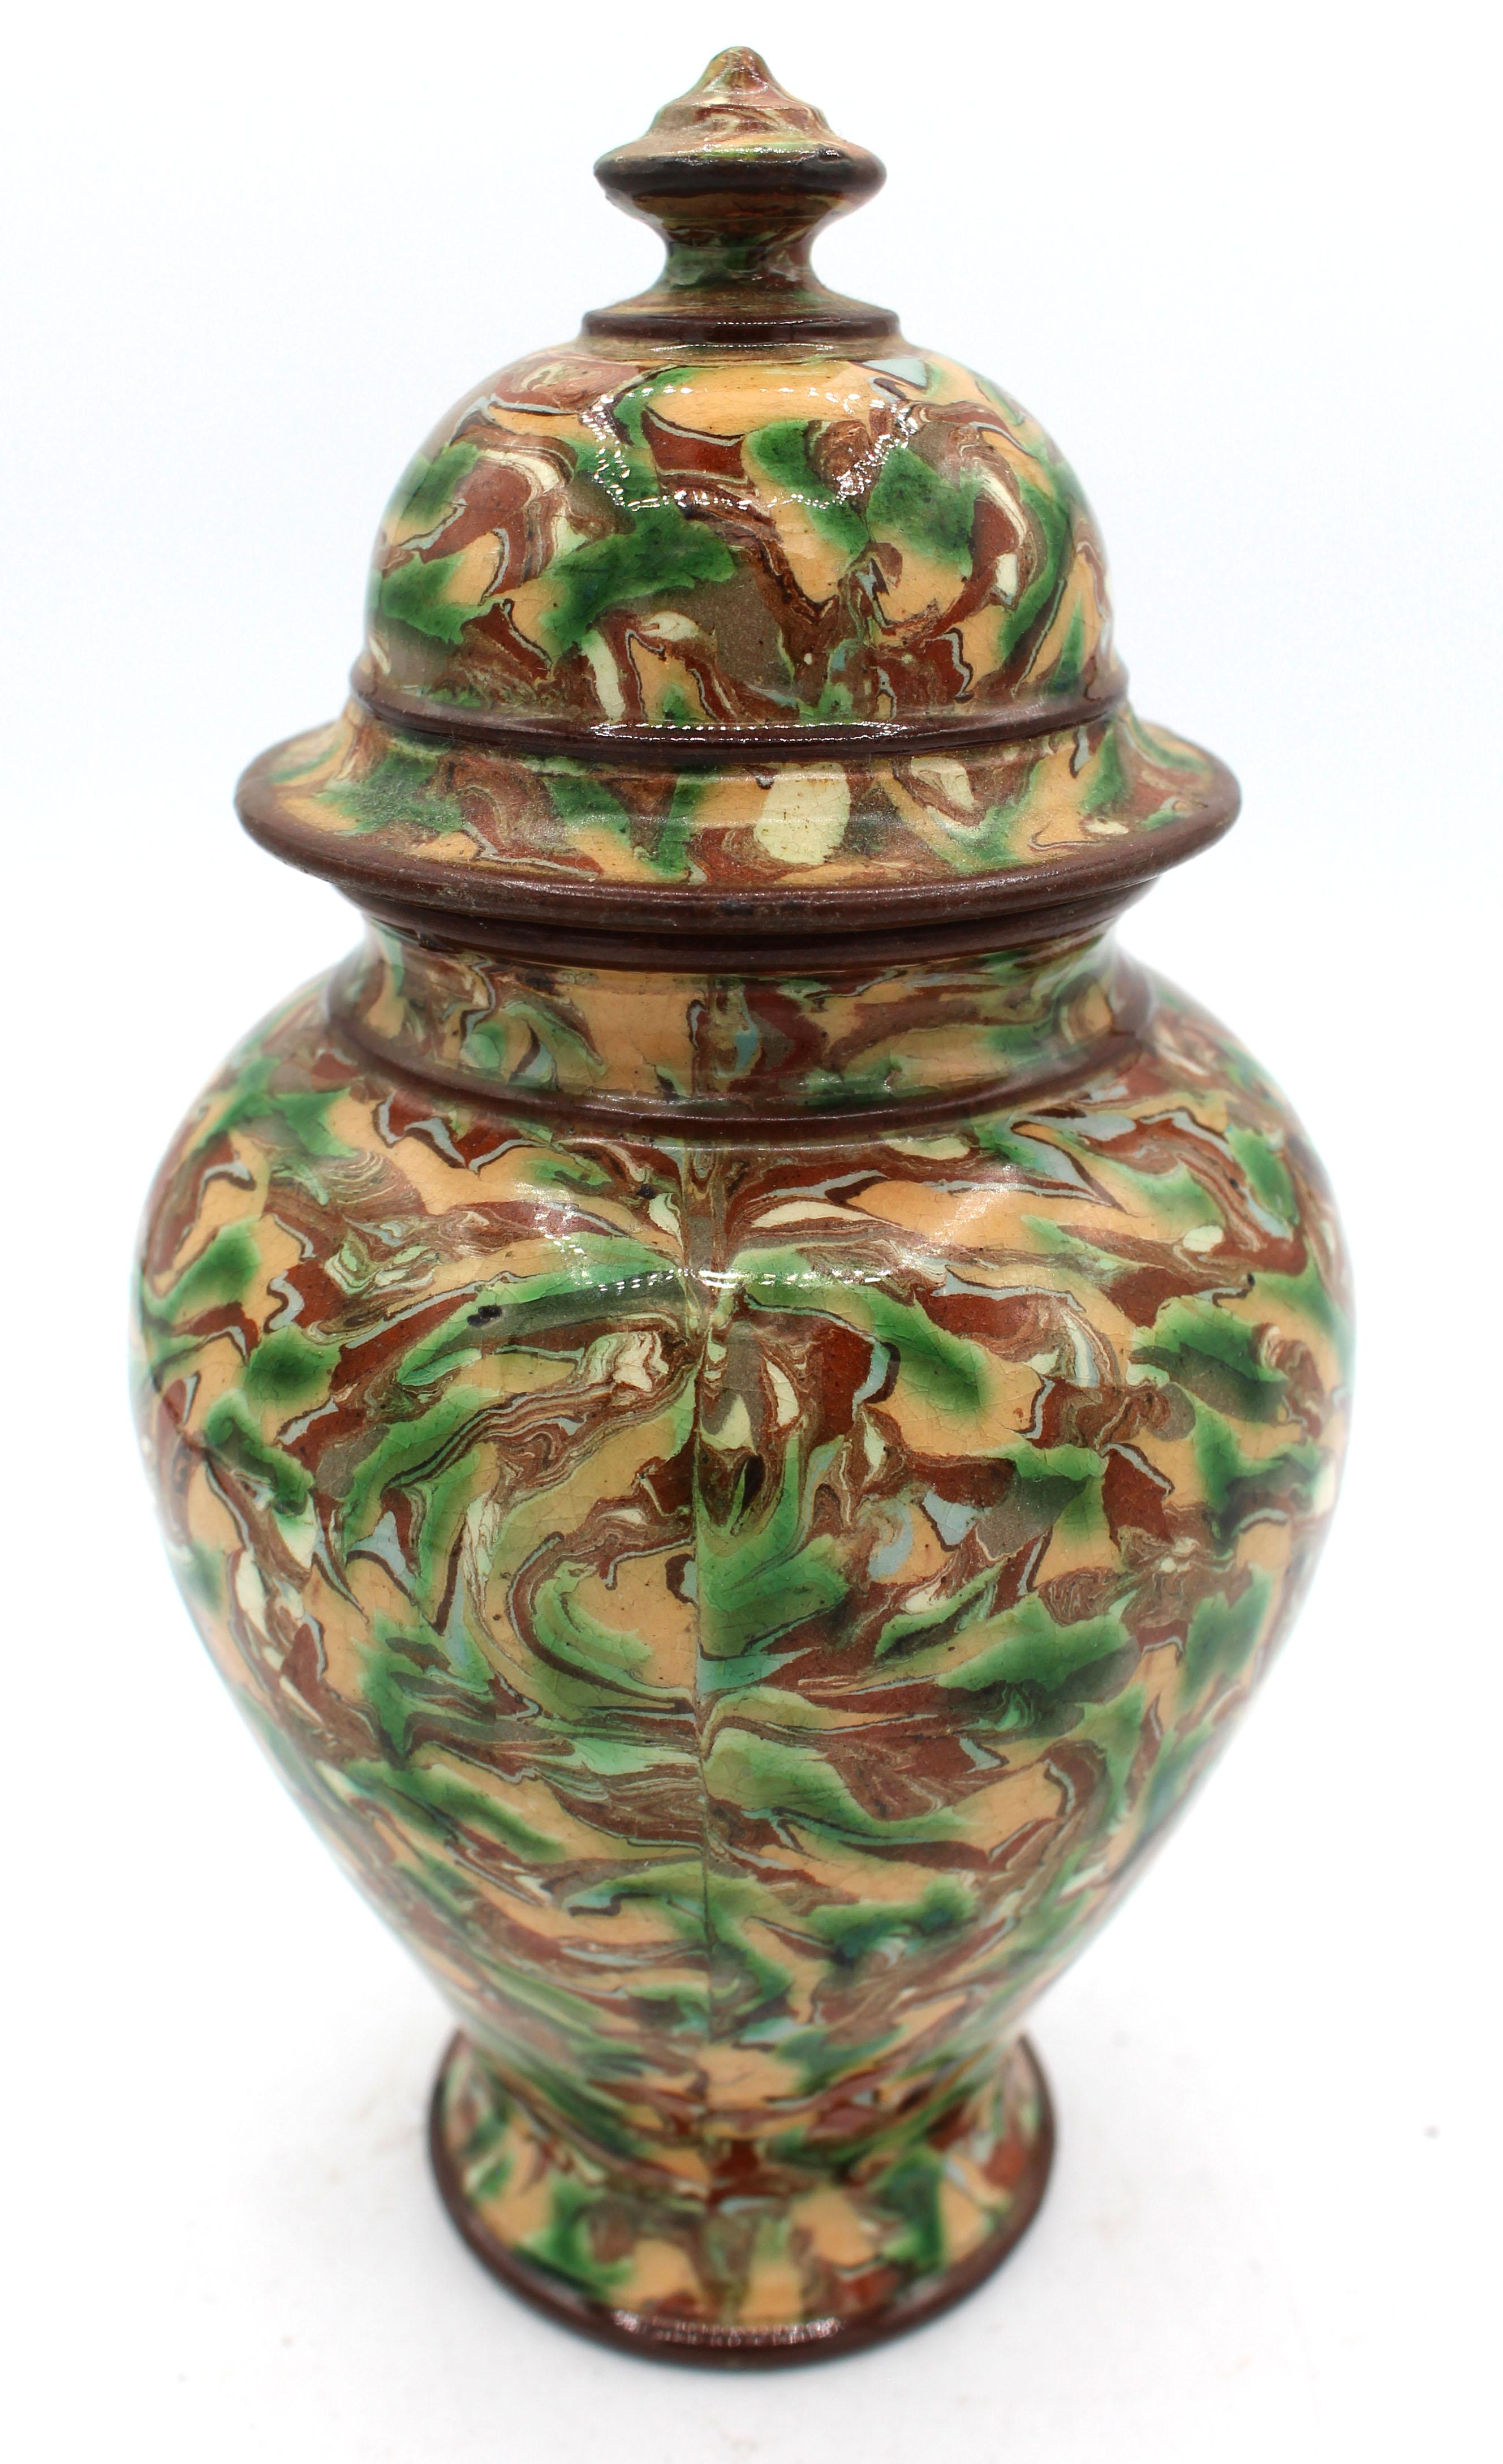 Circa 1900 terracotta covered jar, French, Maison Pichon Uzes. In Pichon's trademark marbelized glaze. The knot with minor rough spot and underside chip and the lid rim with 2 chips.
7.75